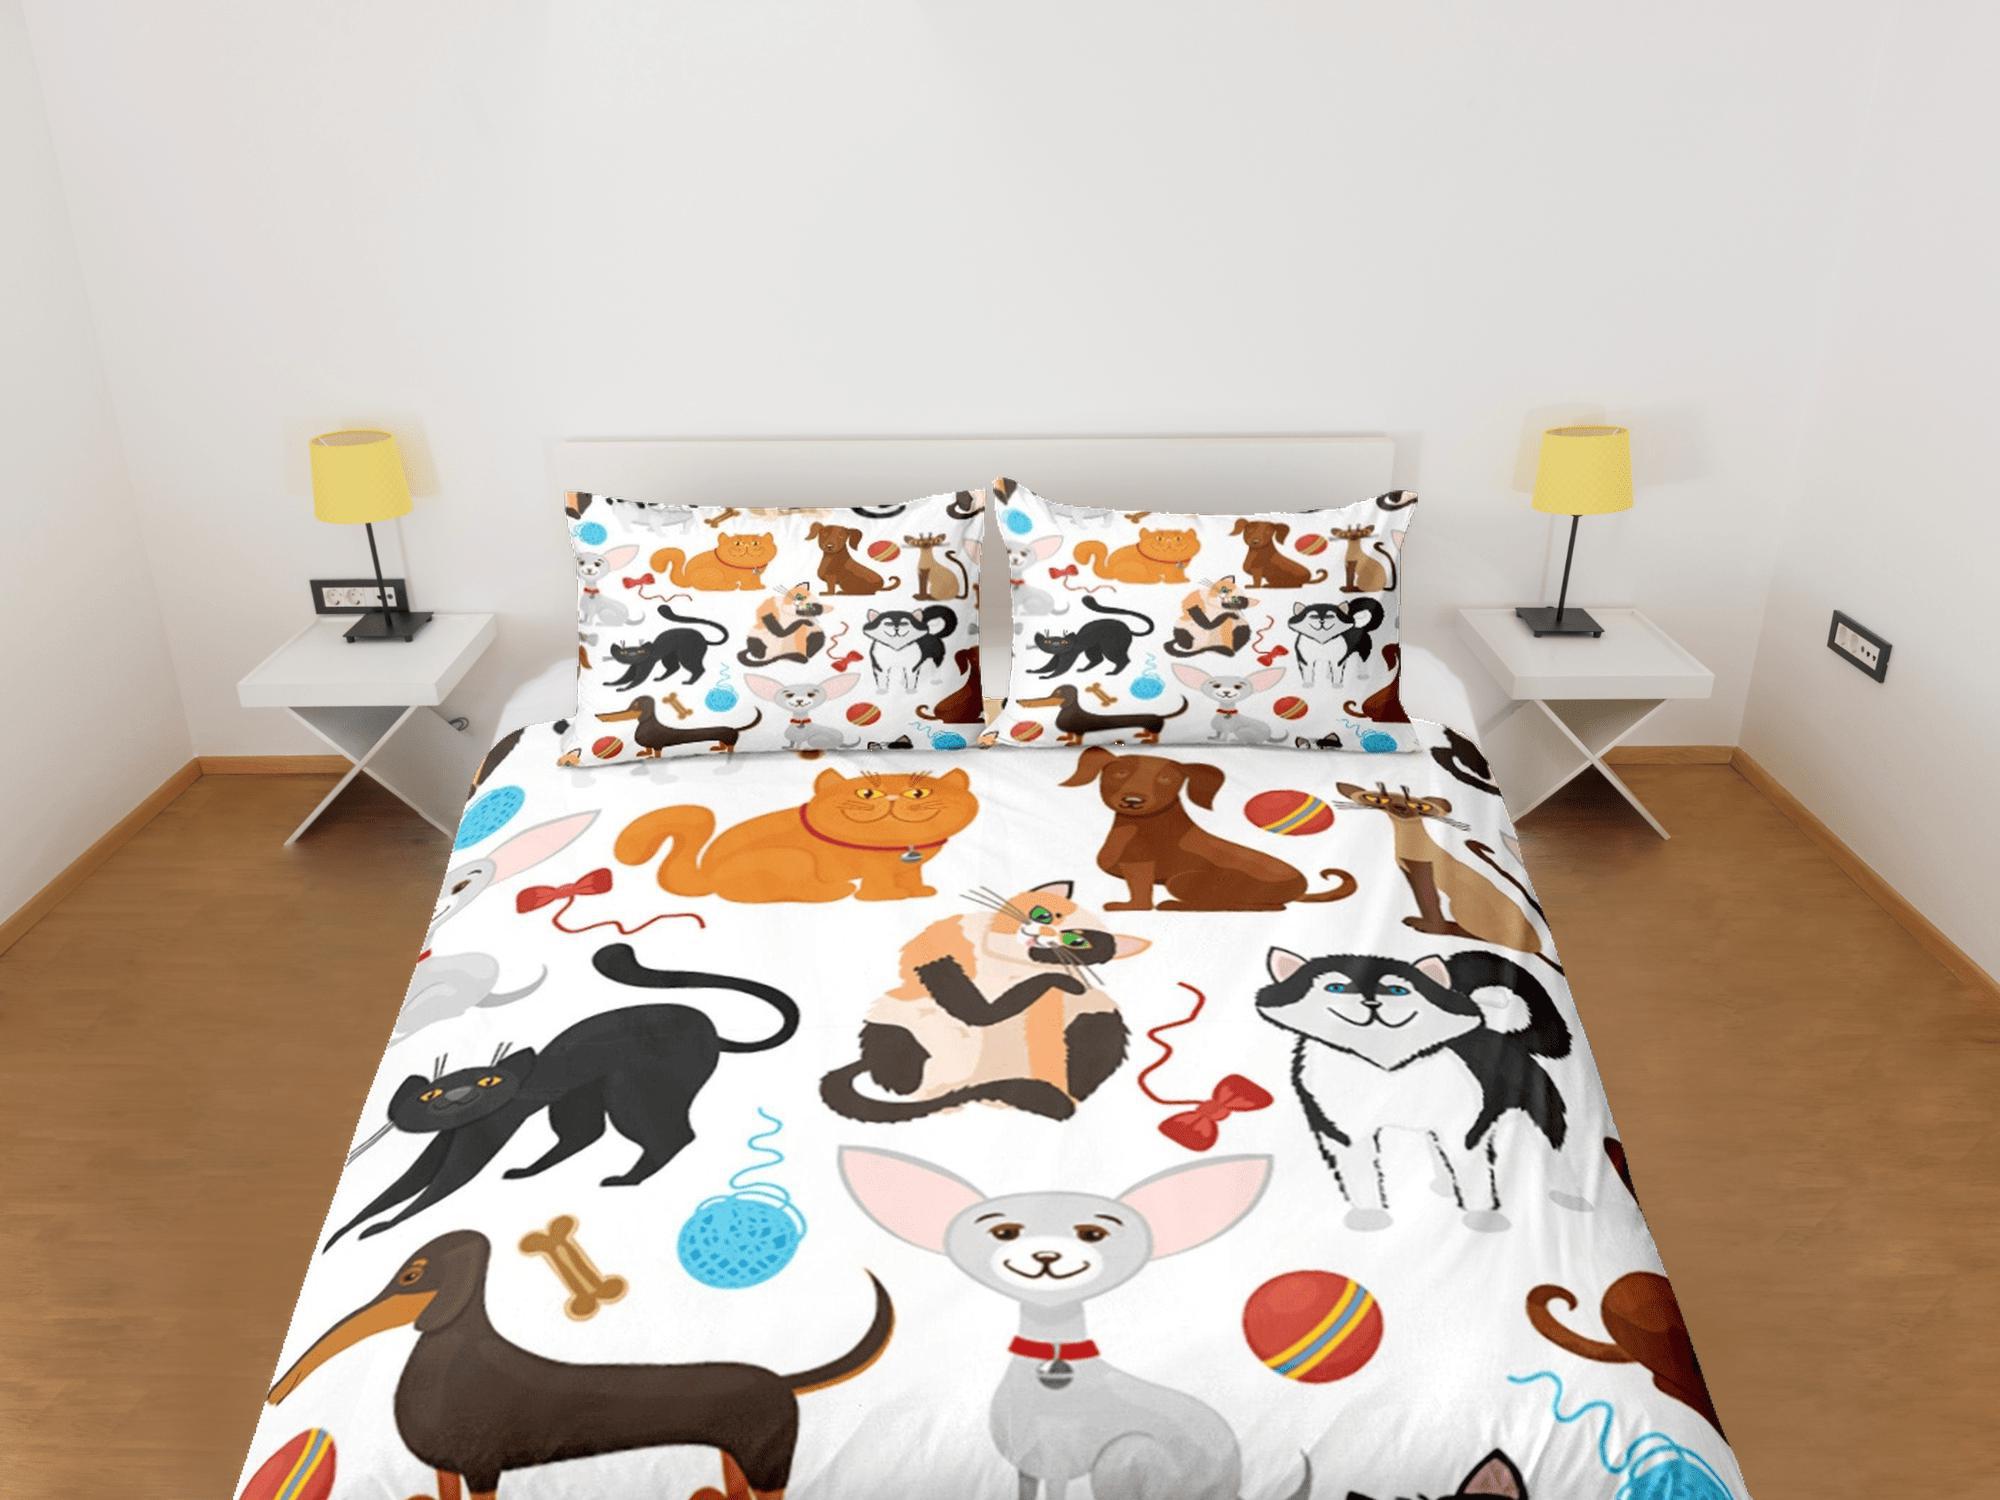 daintyduvet Funny Dogs Duvet Cover Set Colorful Bedspread, Kids Full Bedding Set with Pillowcase, Comforter Cover